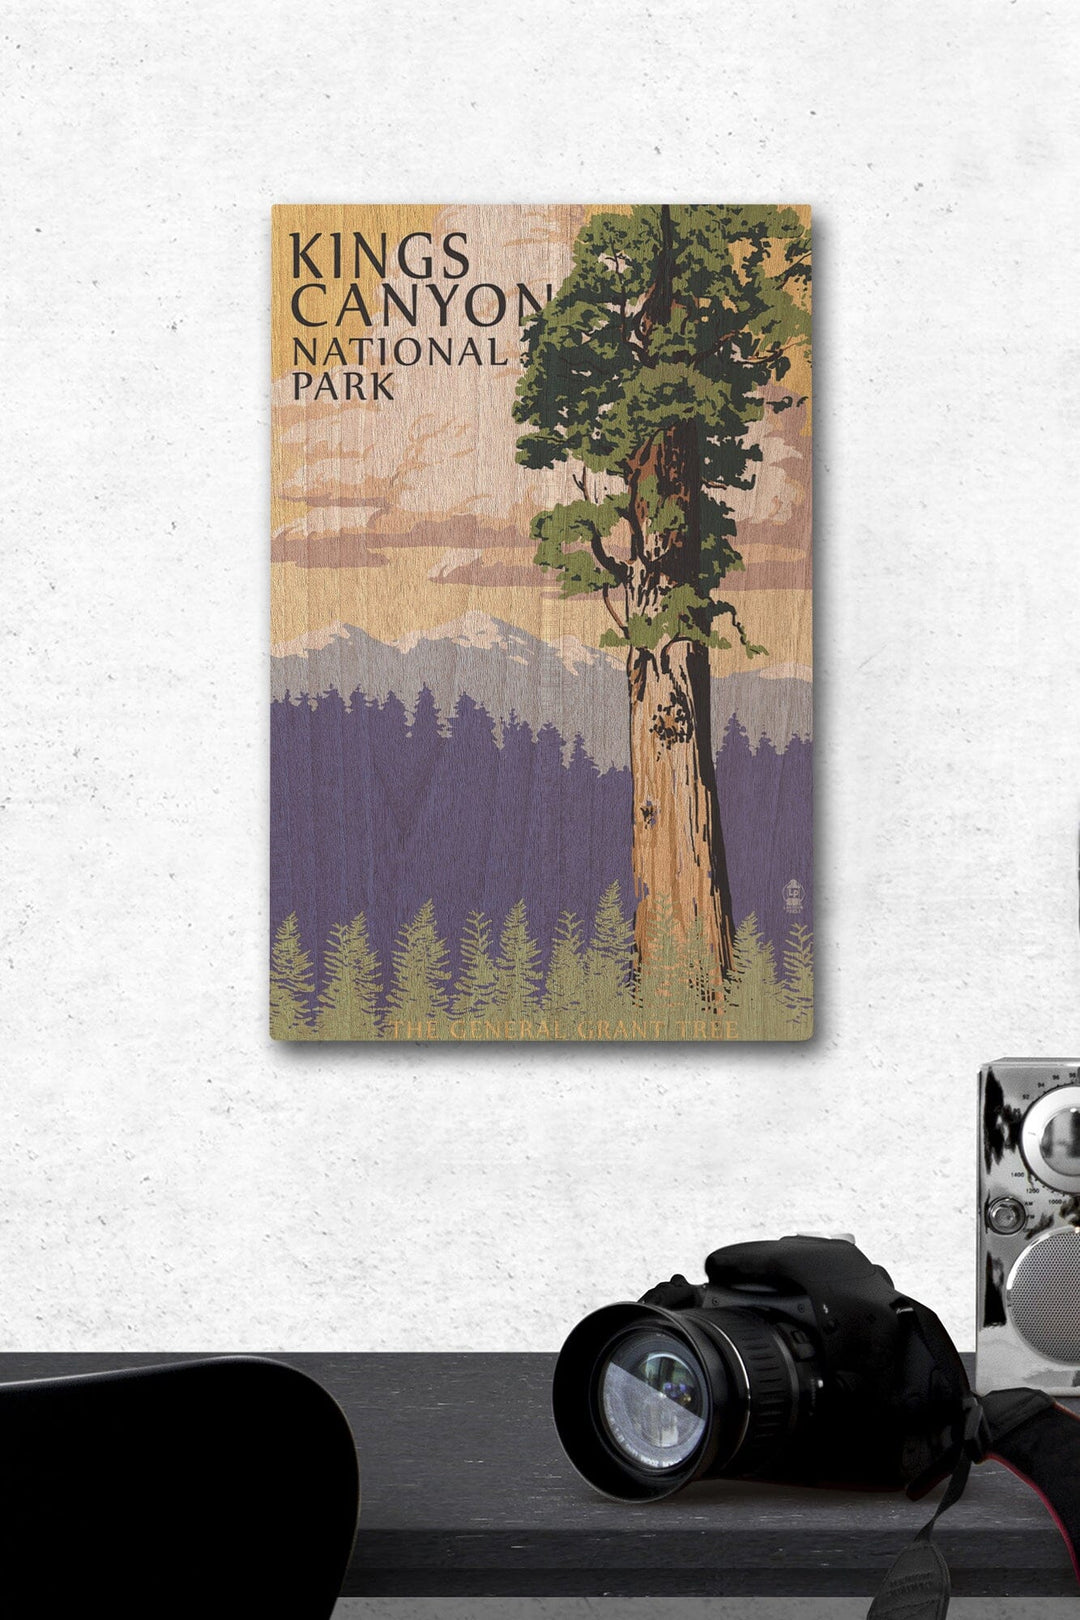 Kings Canyon National Park, California, General Grant Tree and Mountains, Lantern Press Artwork, Wood Signs and Postcards Wood Lantern Press 12 x 18 Wood Gallery Print 